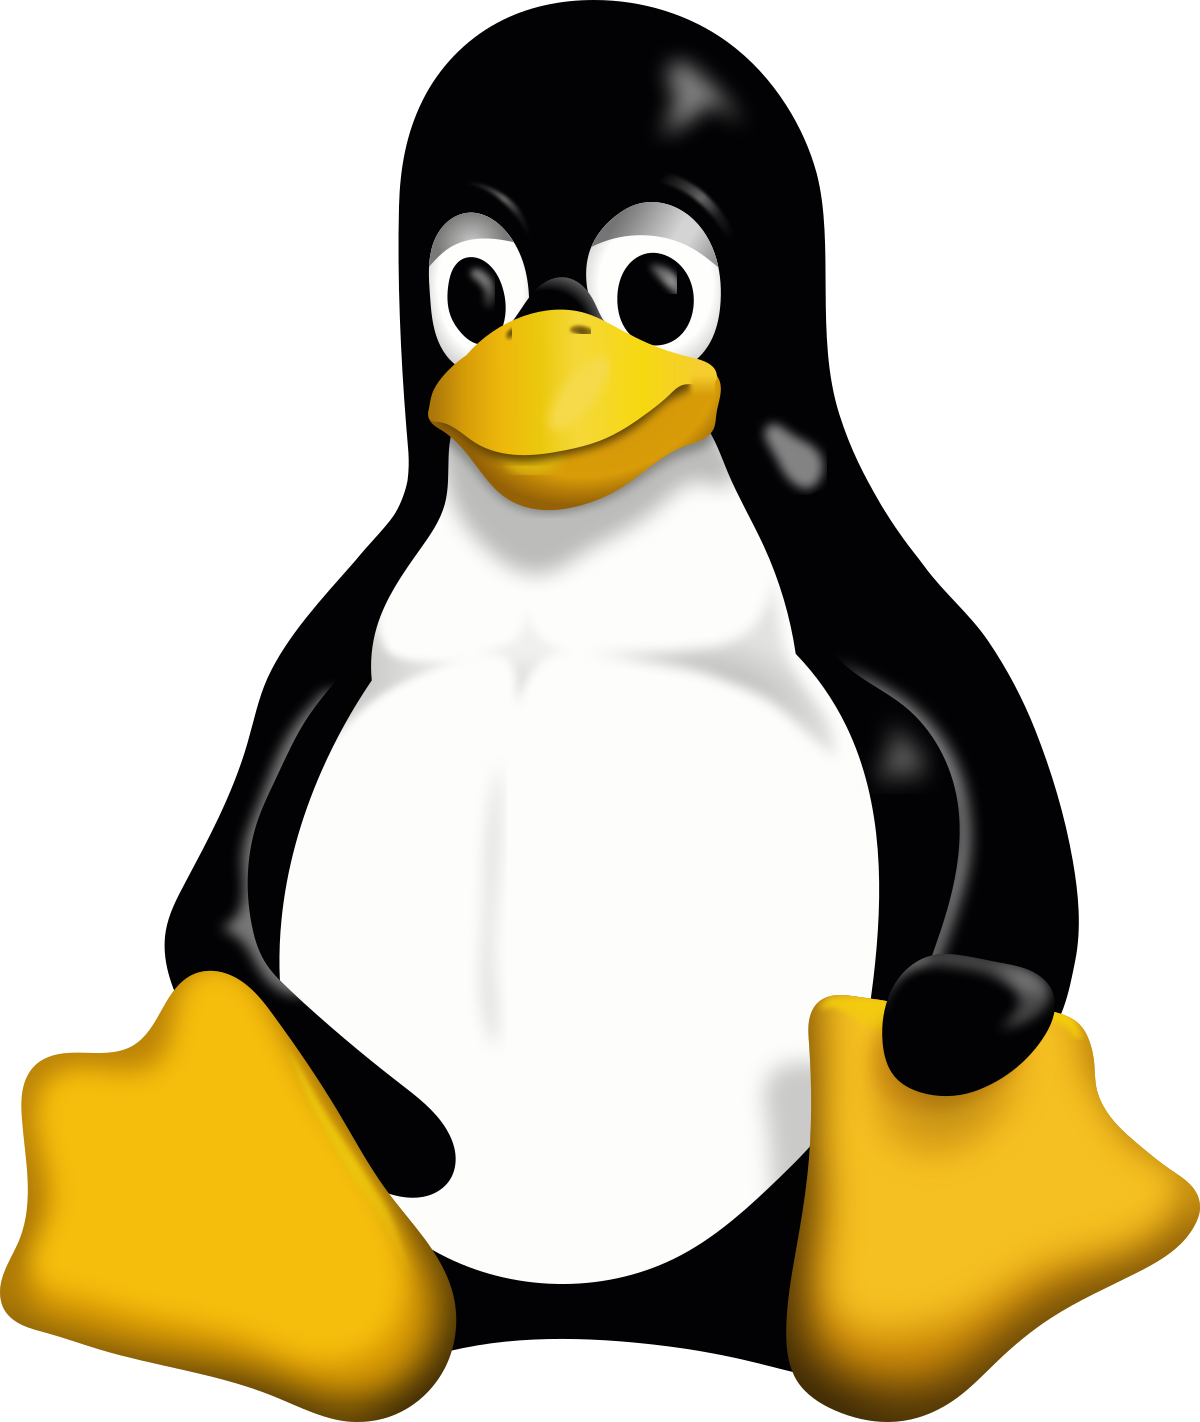 Command line interface in Linux